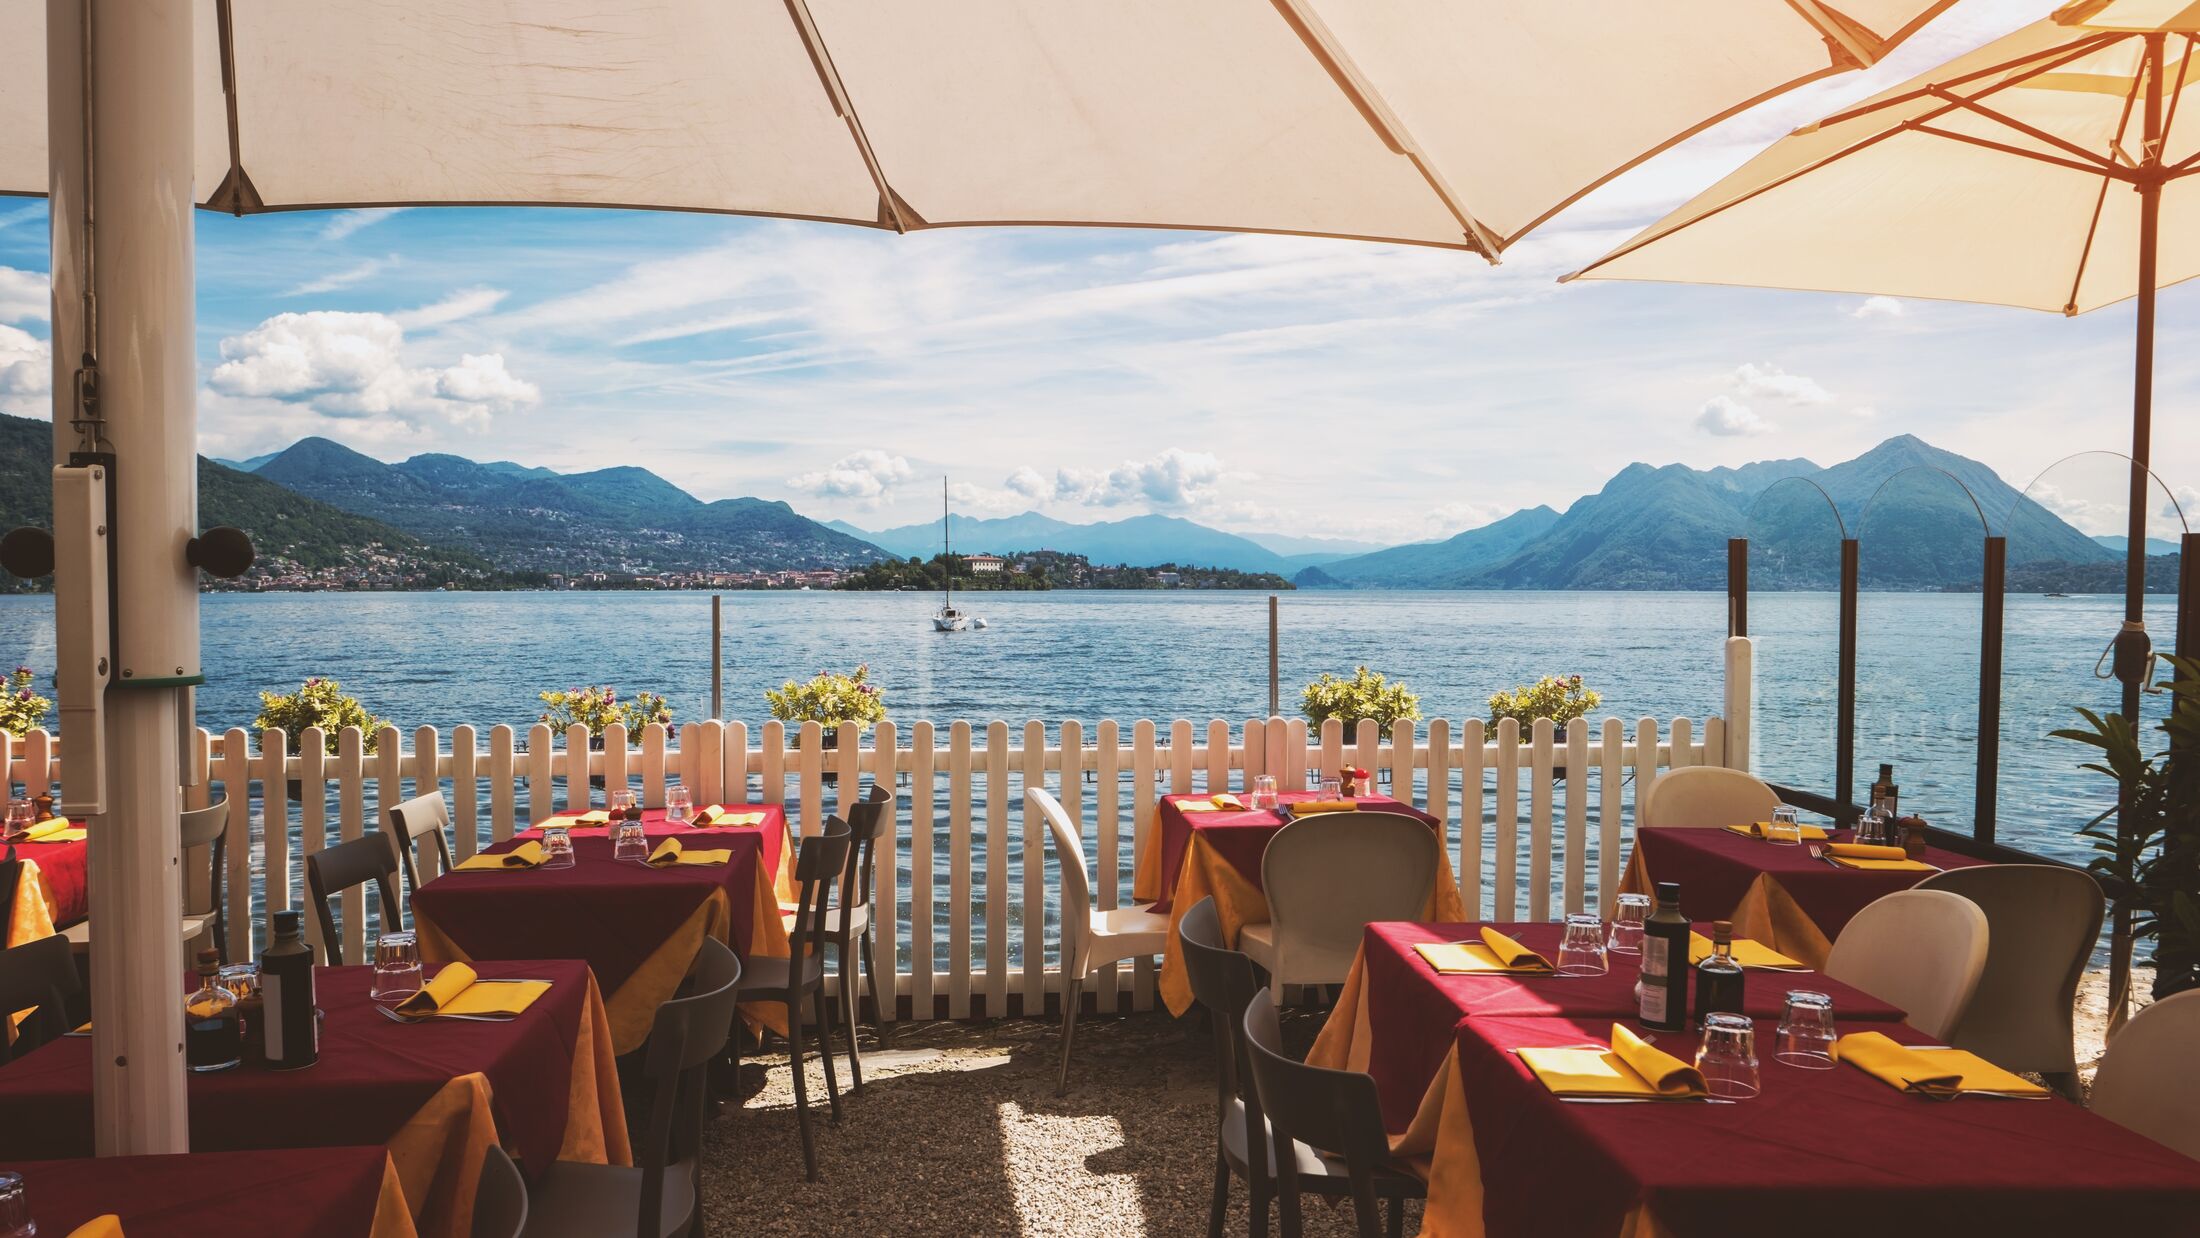 Tables and chairs near water. Mountains at distance. Restaurant in the open air.